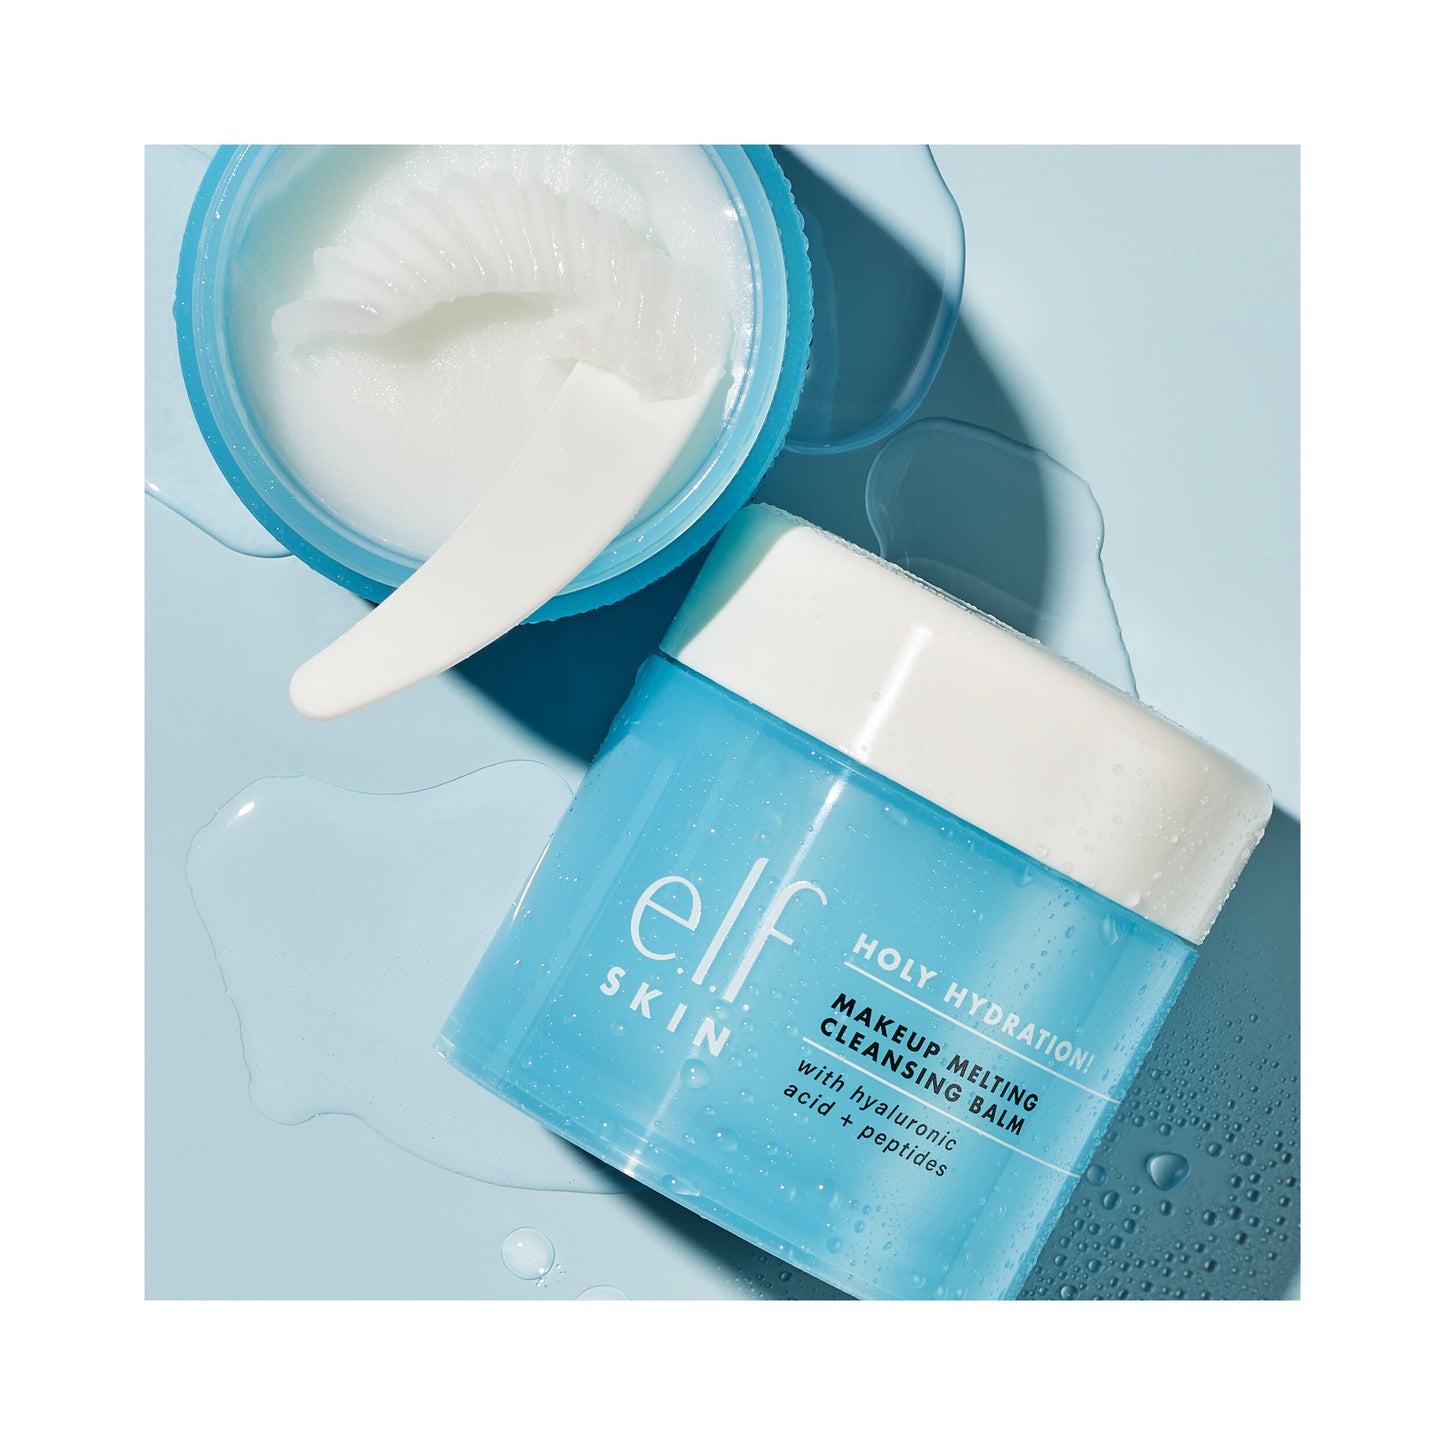 ELF Holy Hydration! Makeup Melting Cleansing Balm